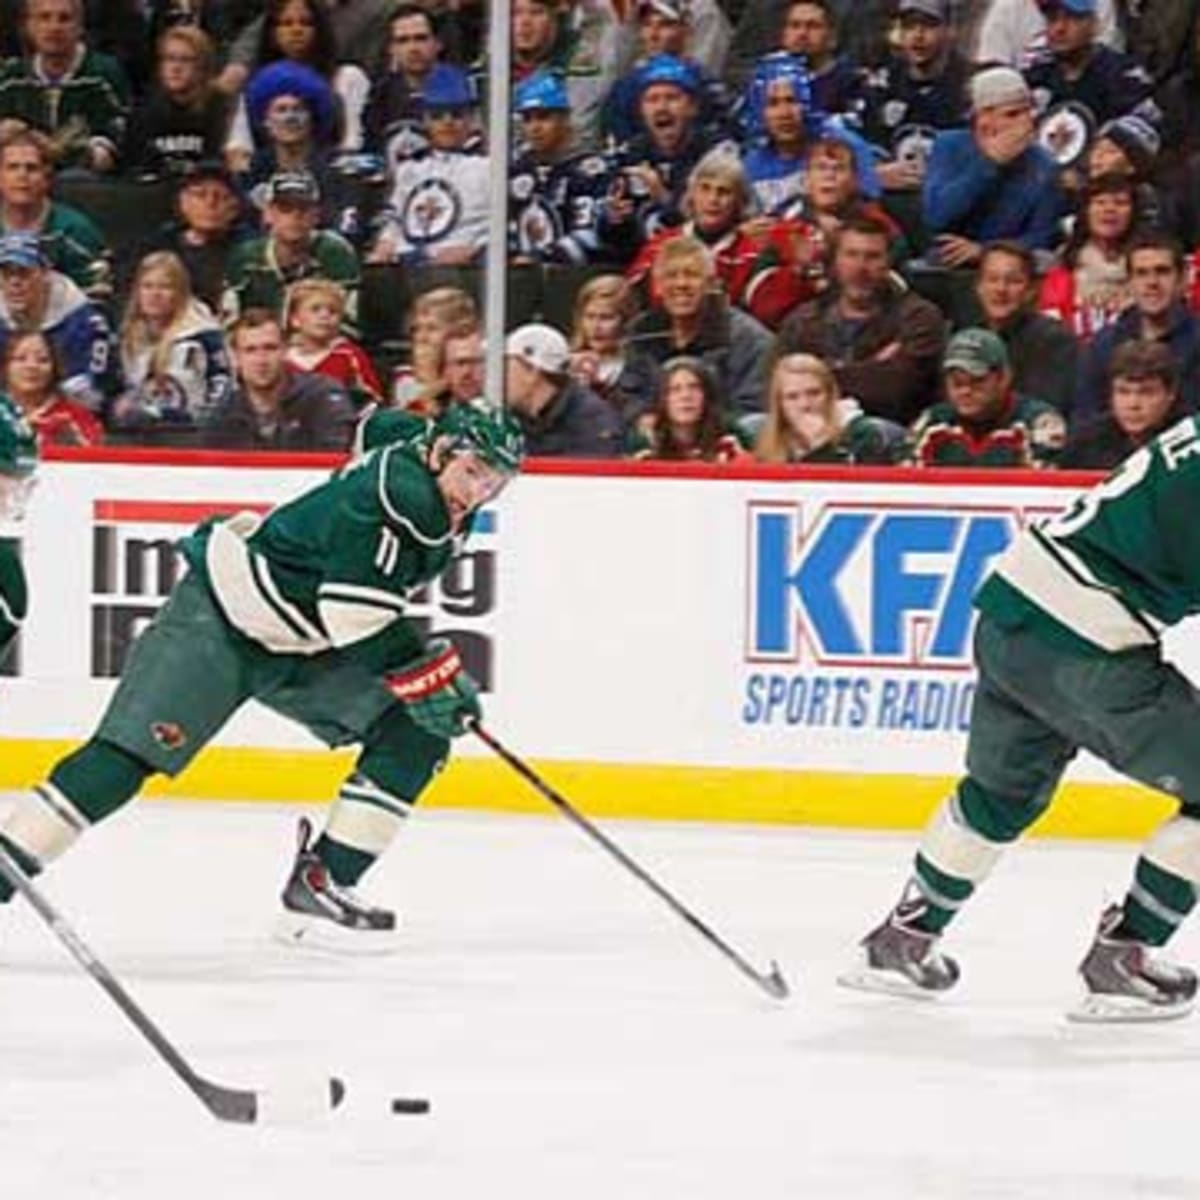 Zach Parise Hockey Stats and Profile at